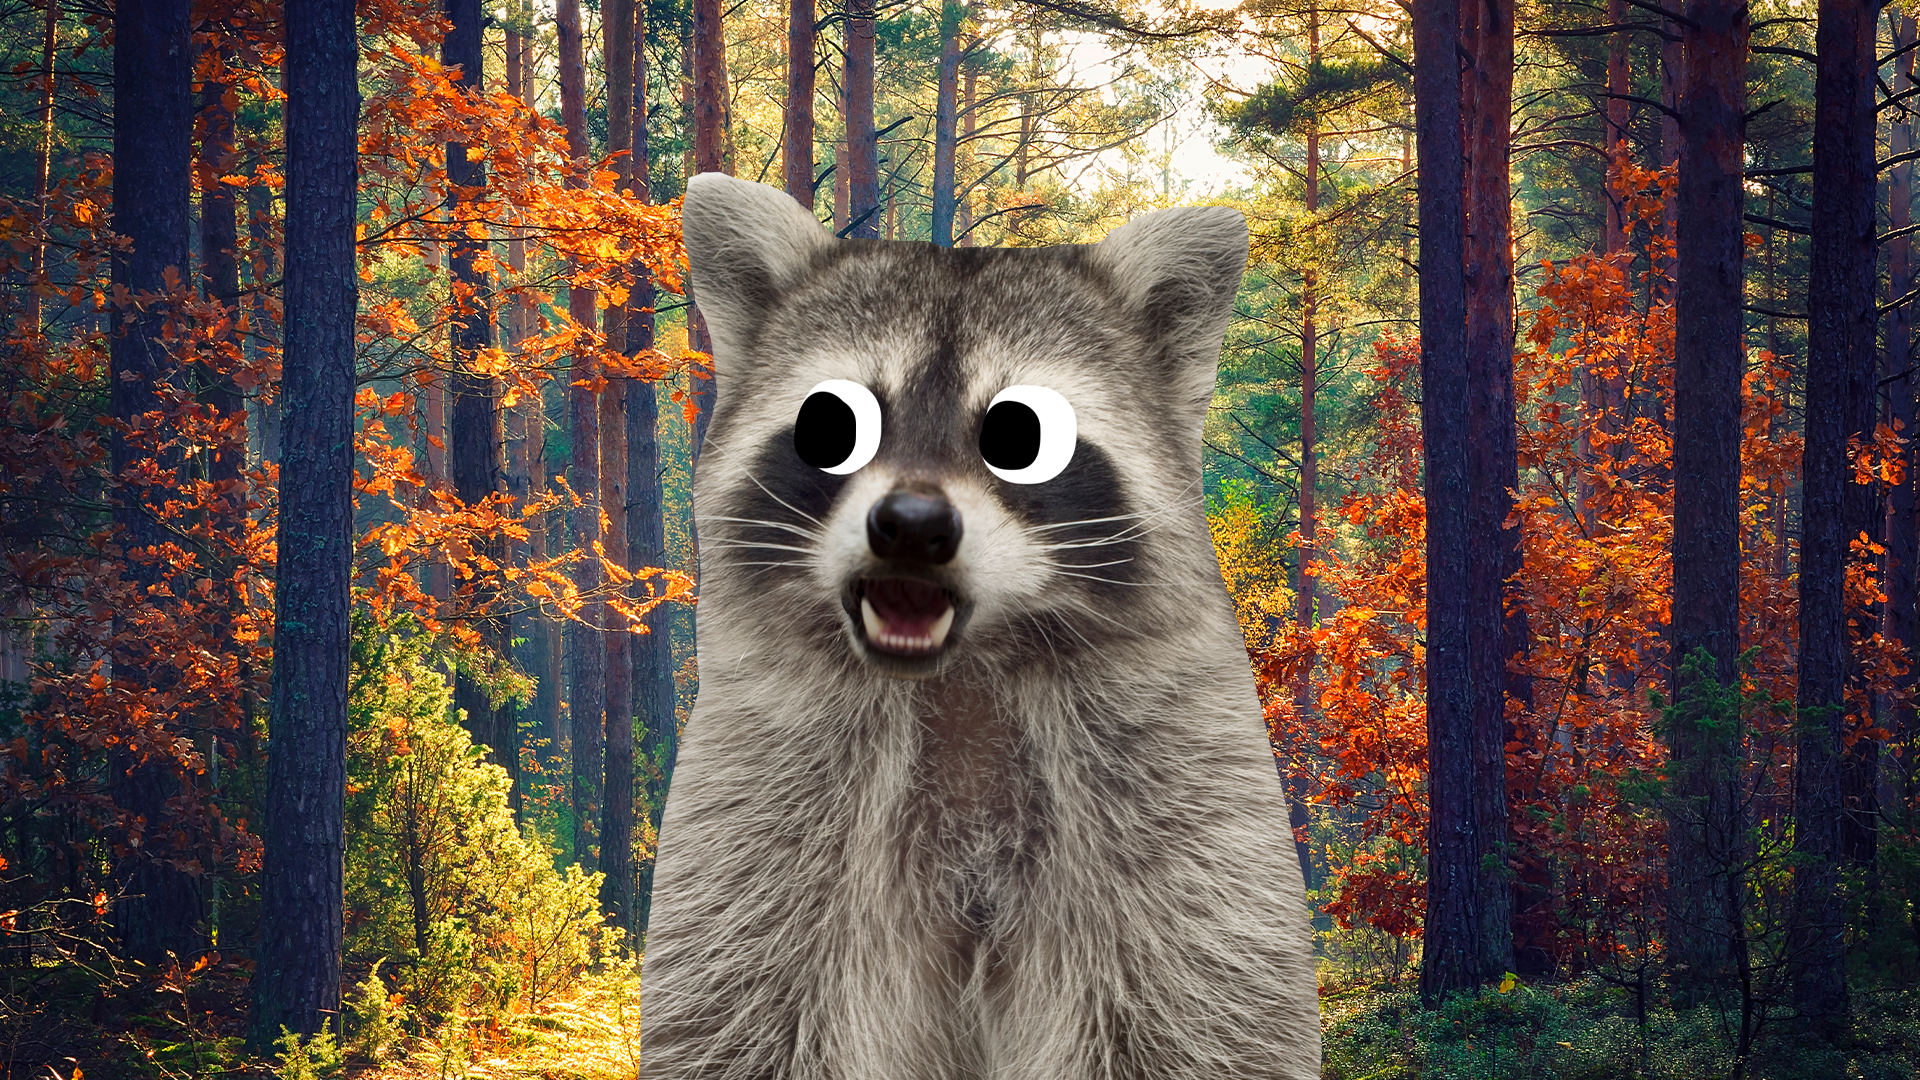 Racoon in the wilderness